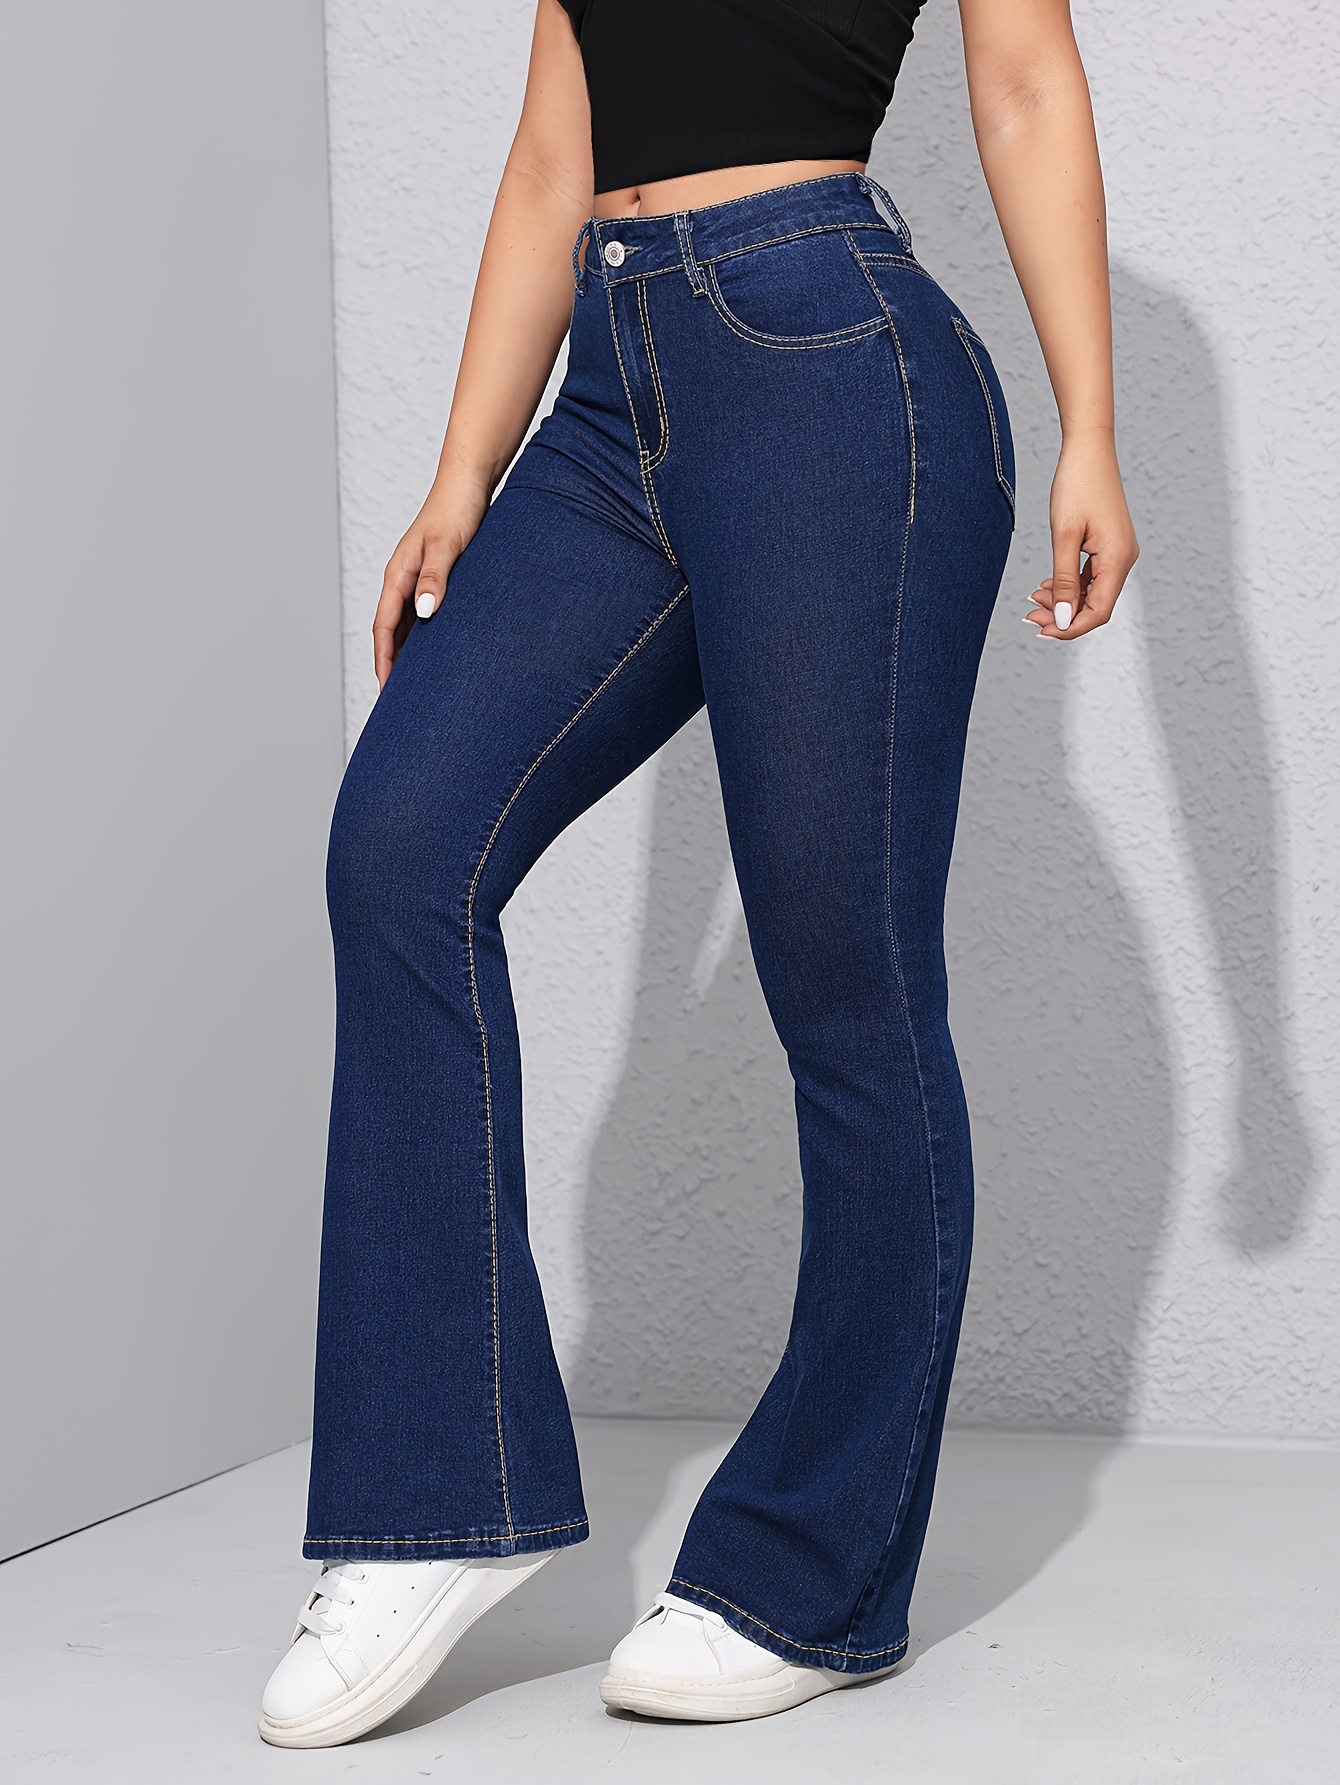 Ladies Bell Bottom Jeans Flared Trousers Denim Pants Bootcut High